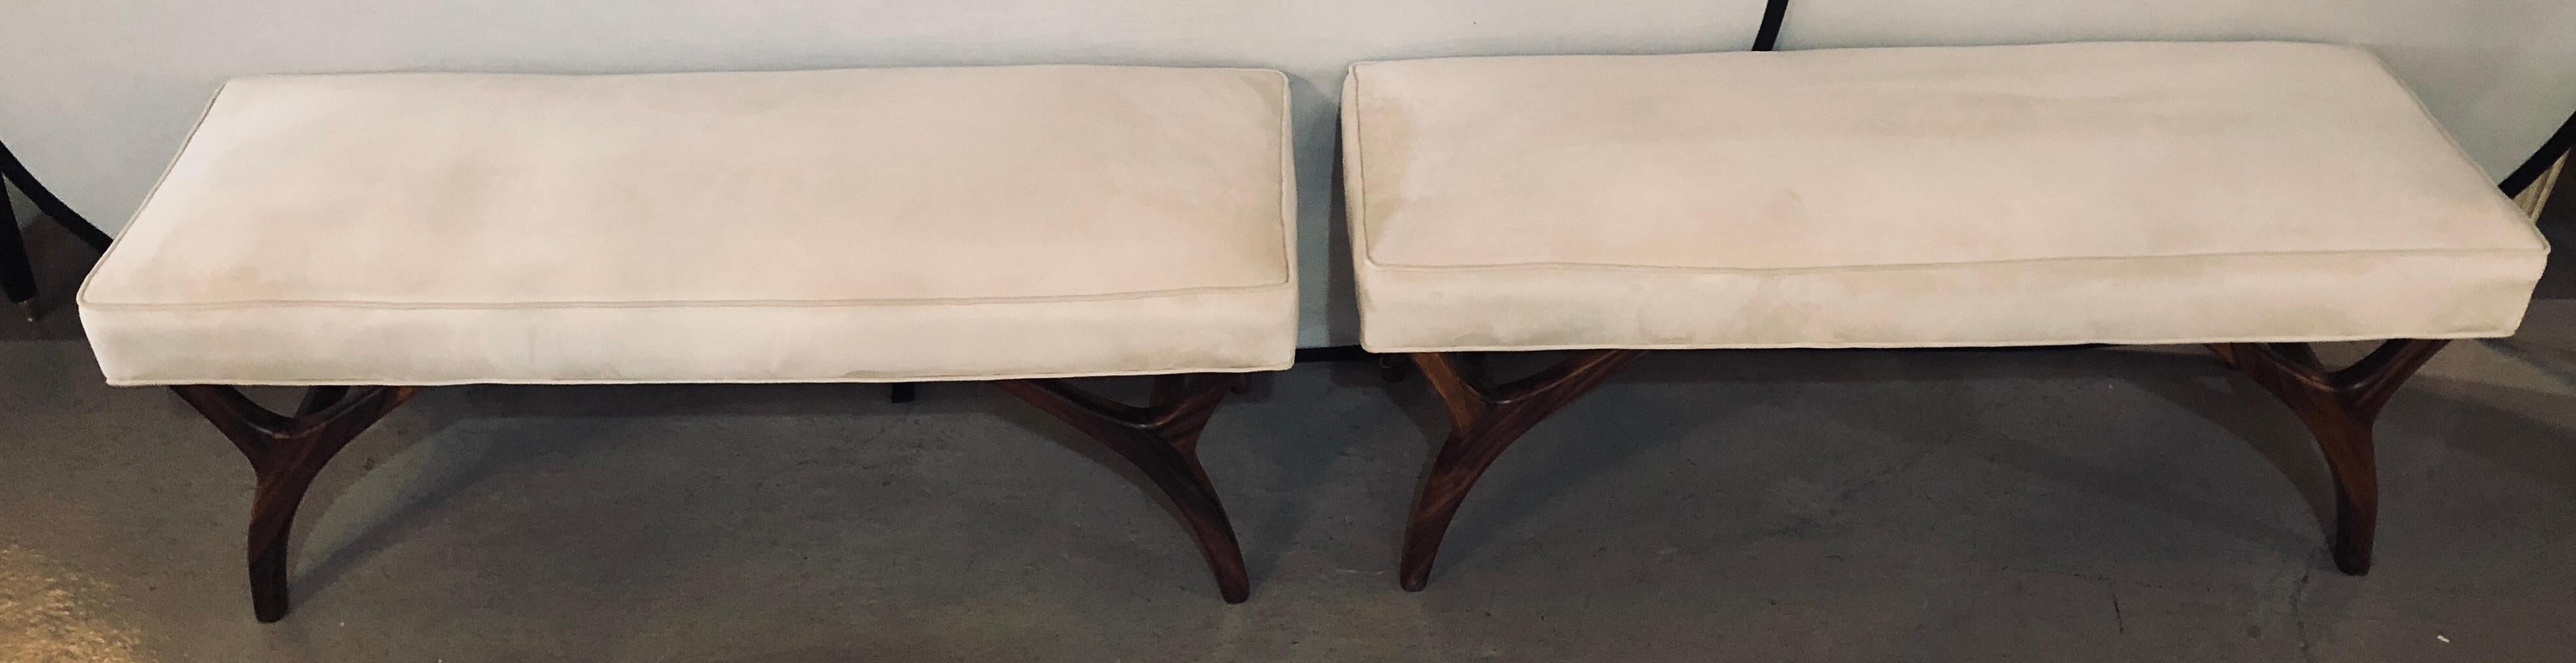 Pair of Mid-Century Modern window benches or stools in an new upholstery with new welts and springs. The fine rosewood like carved legs supporting a comfortable and recently upholstered seat.